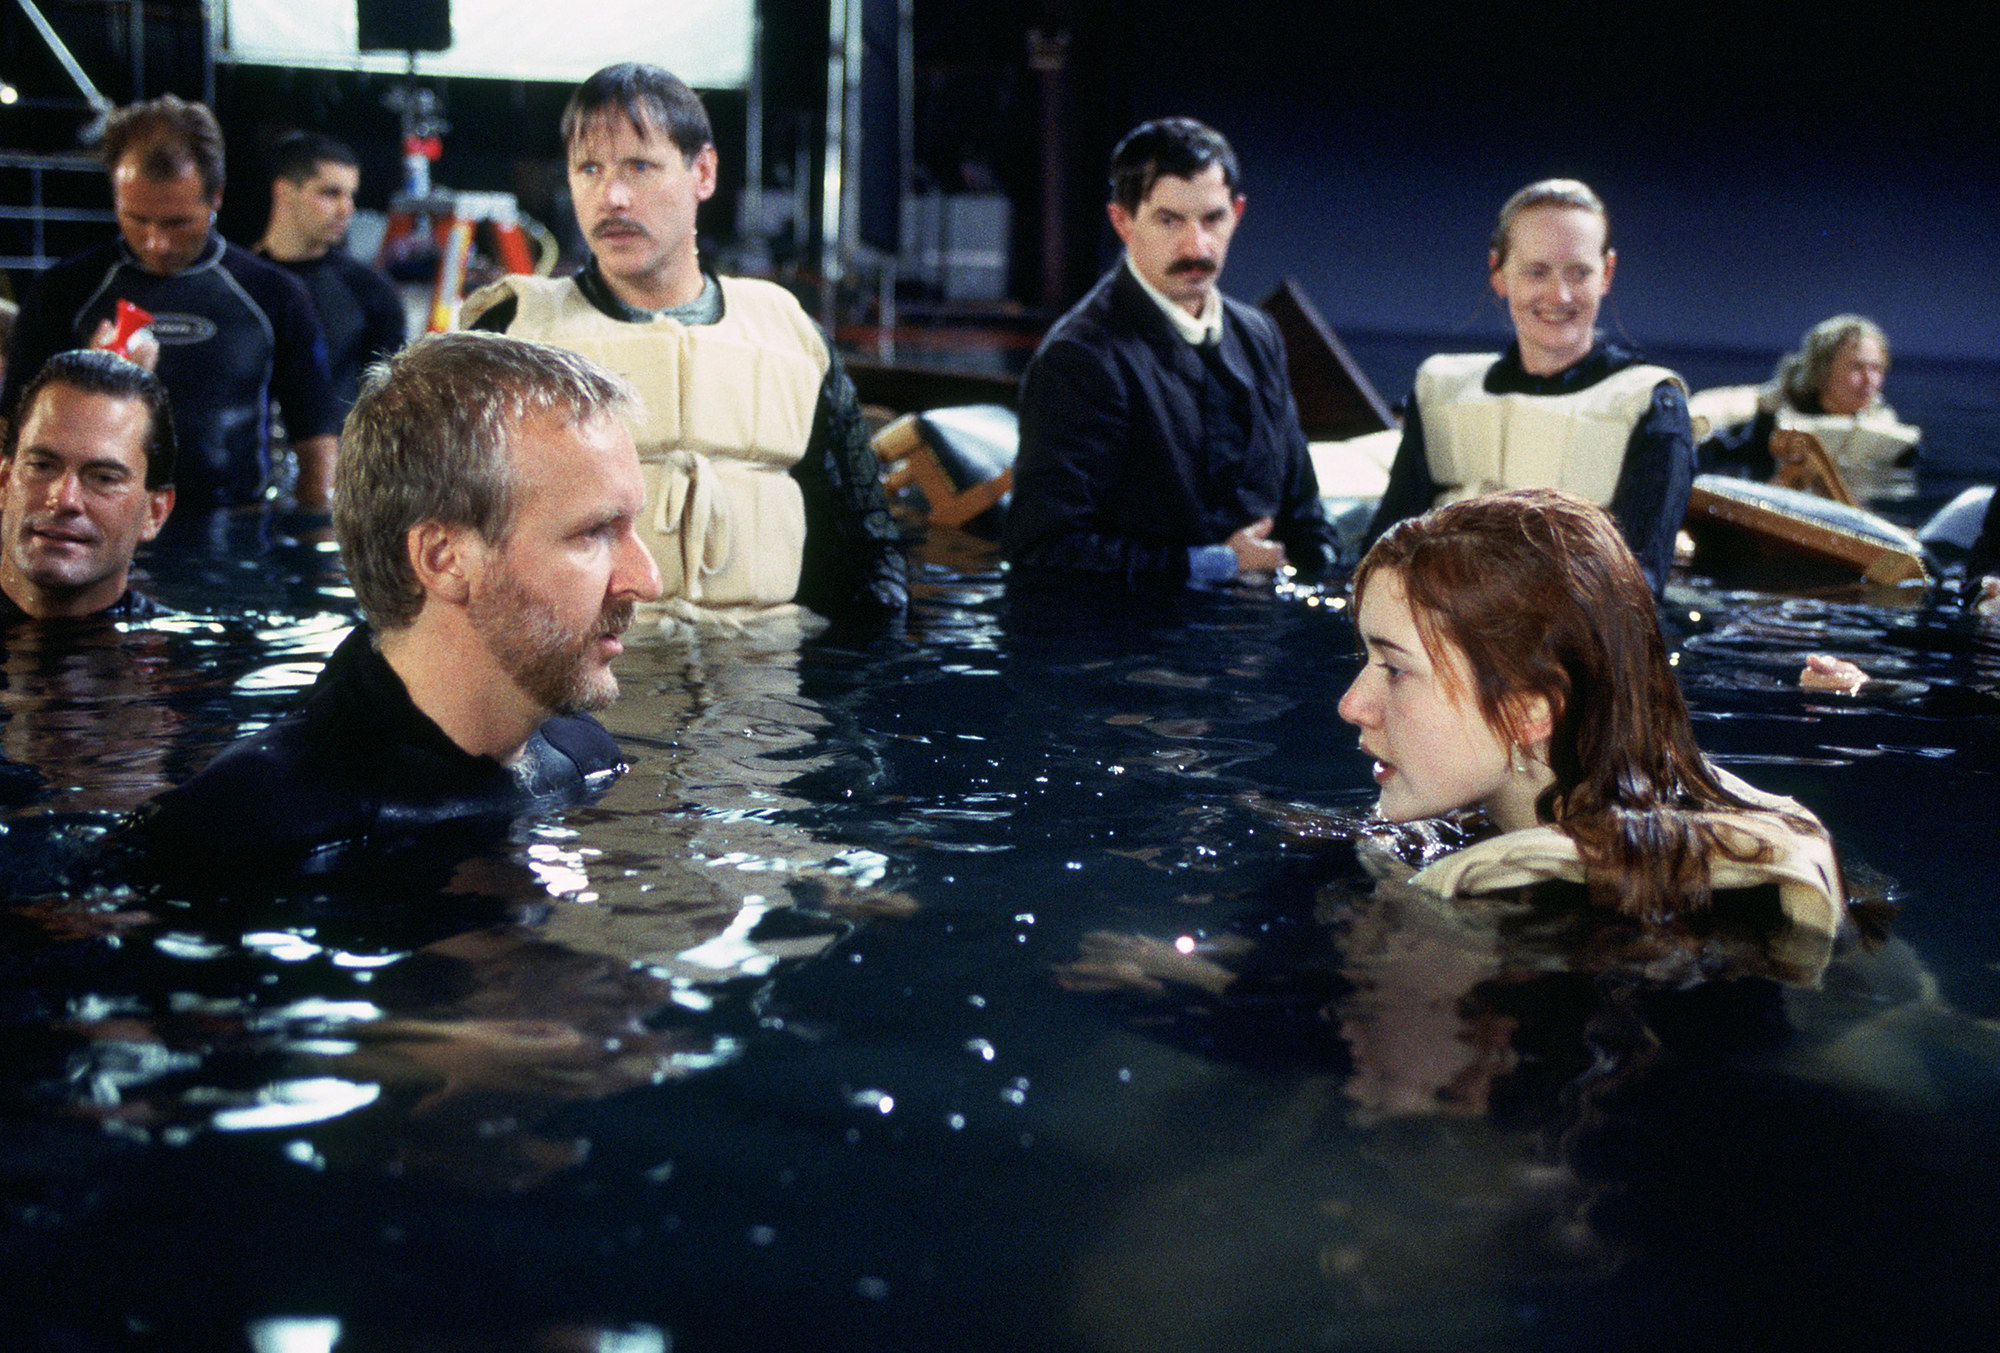 Cameron and Winslet are talking in the water, surrounded by crew